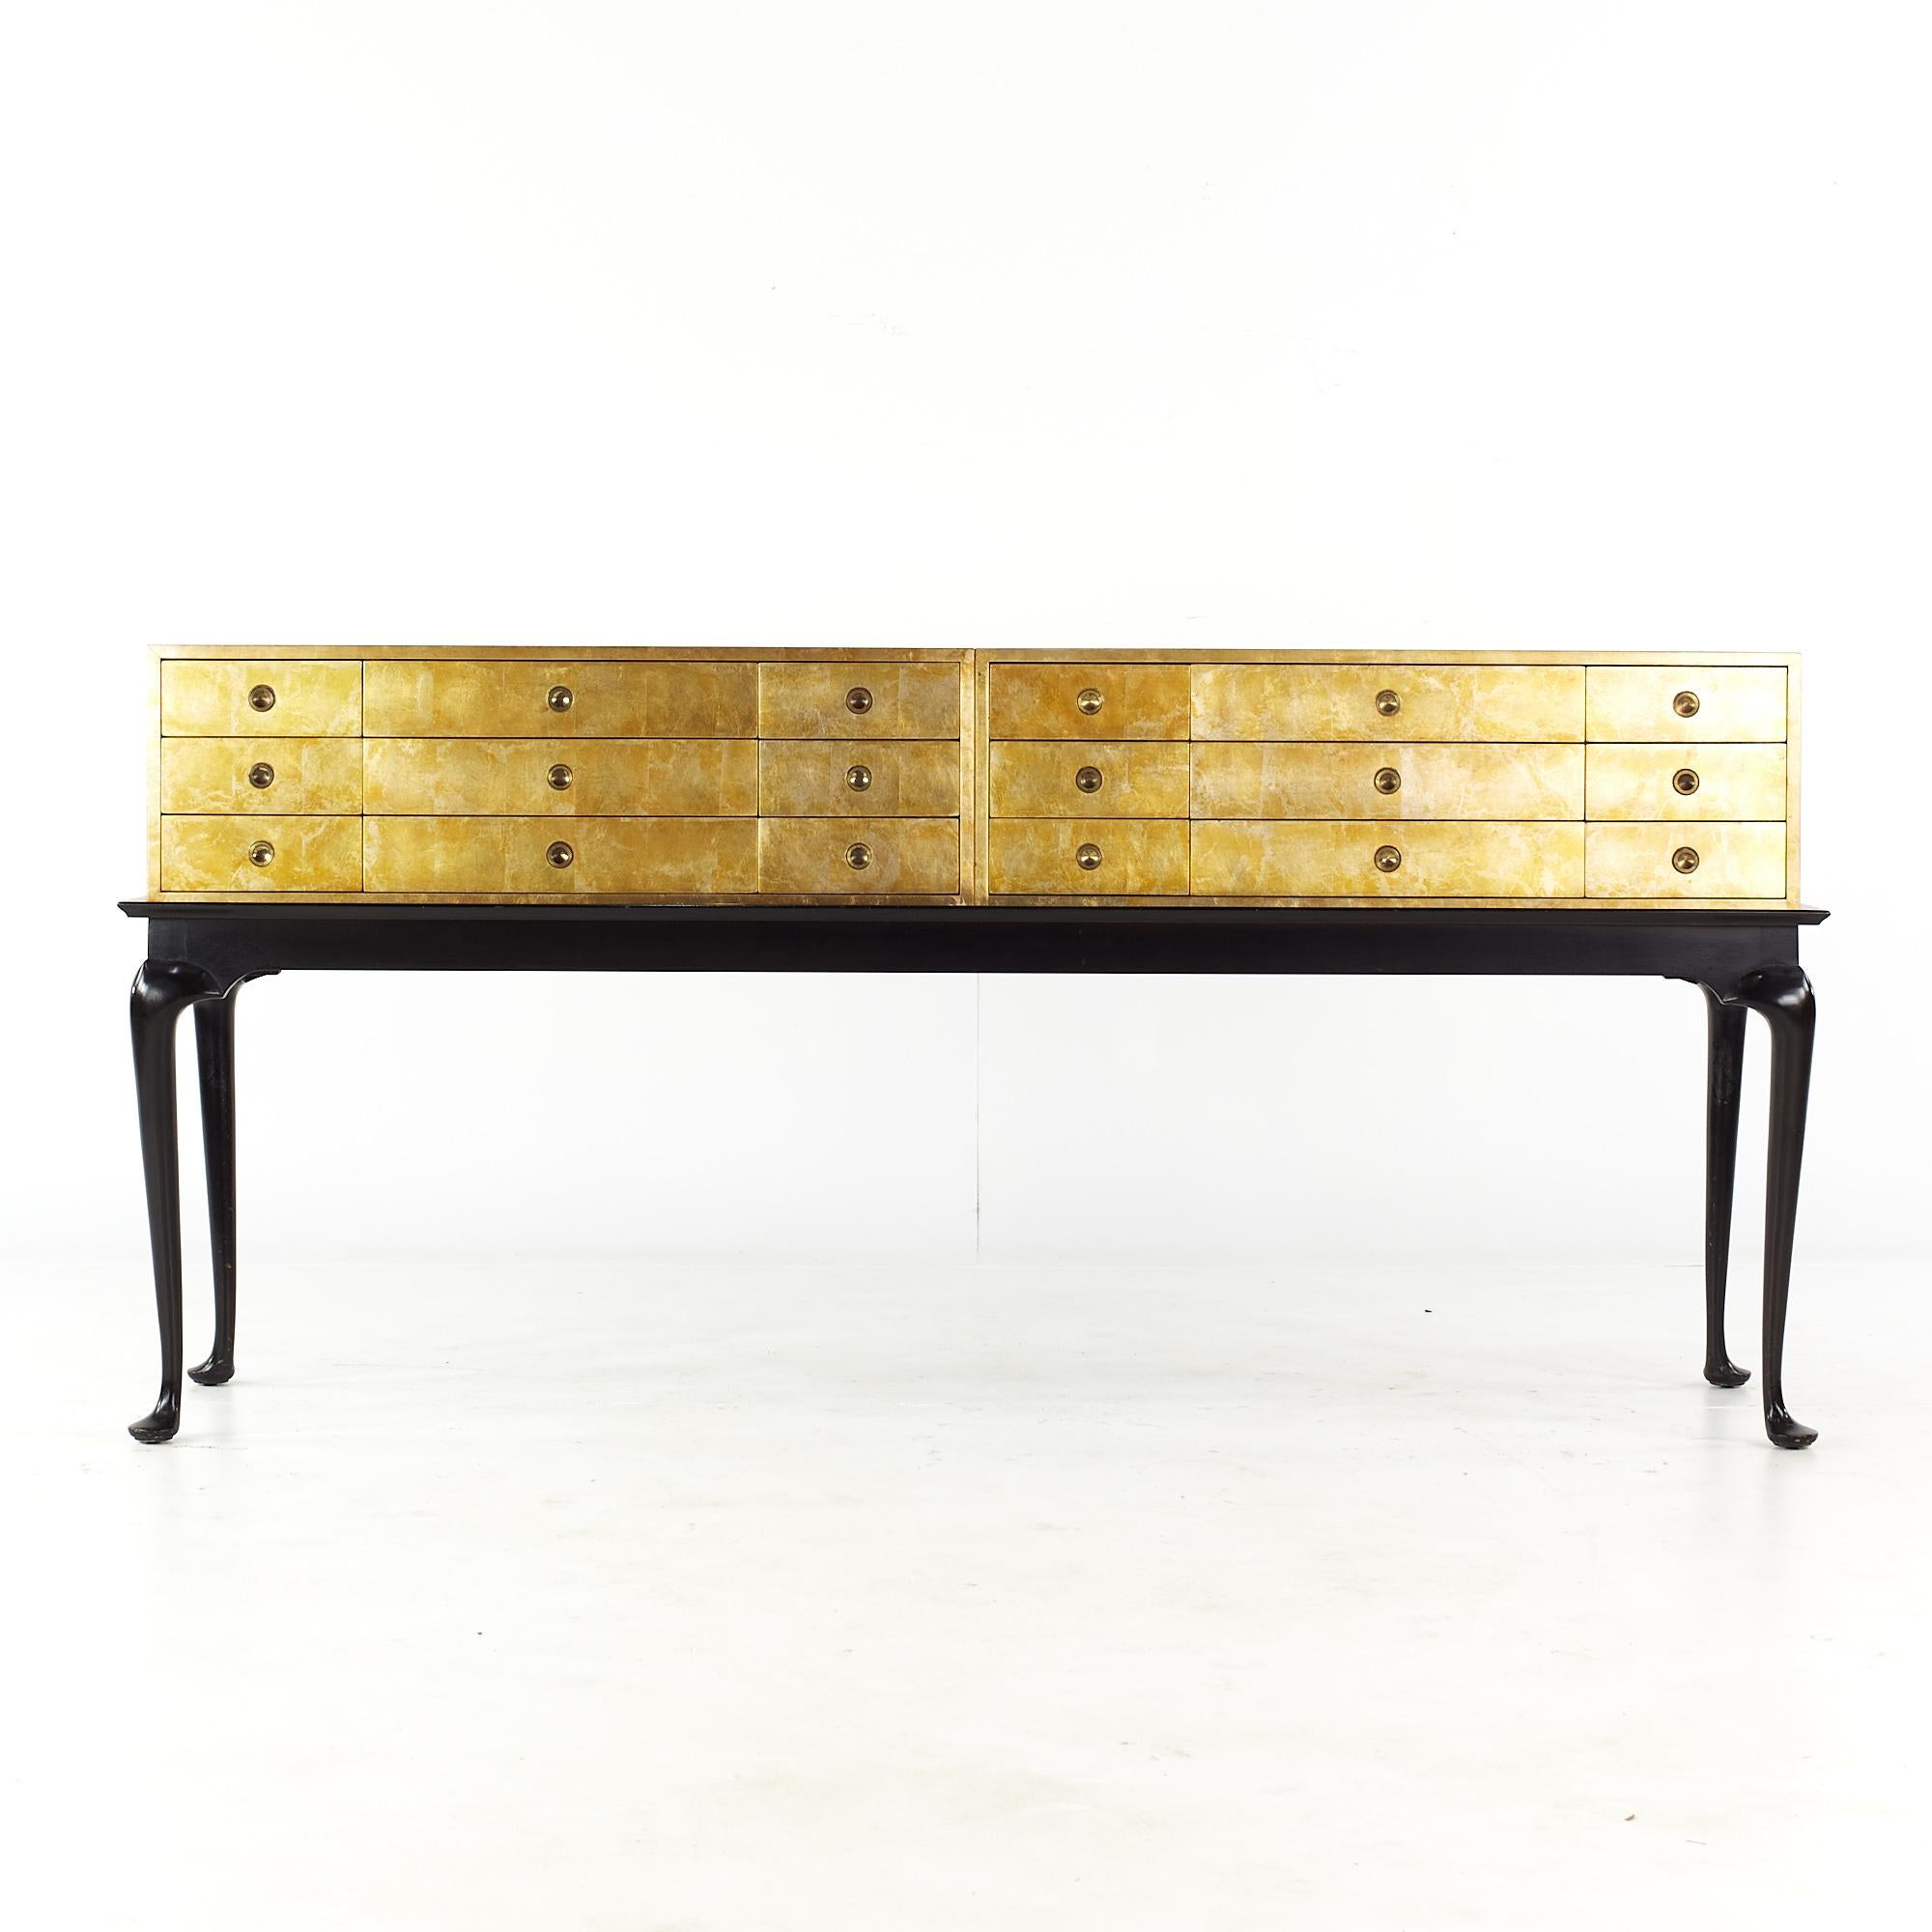 Kittinger mid century gold leaf chest of drawers on black lacquer stand

This chest of drawers measures: 71.25 wide x 21.5 deep x 36.5 inches high

All pieces of furniture can be had in what we call restored vintage condition. That means the